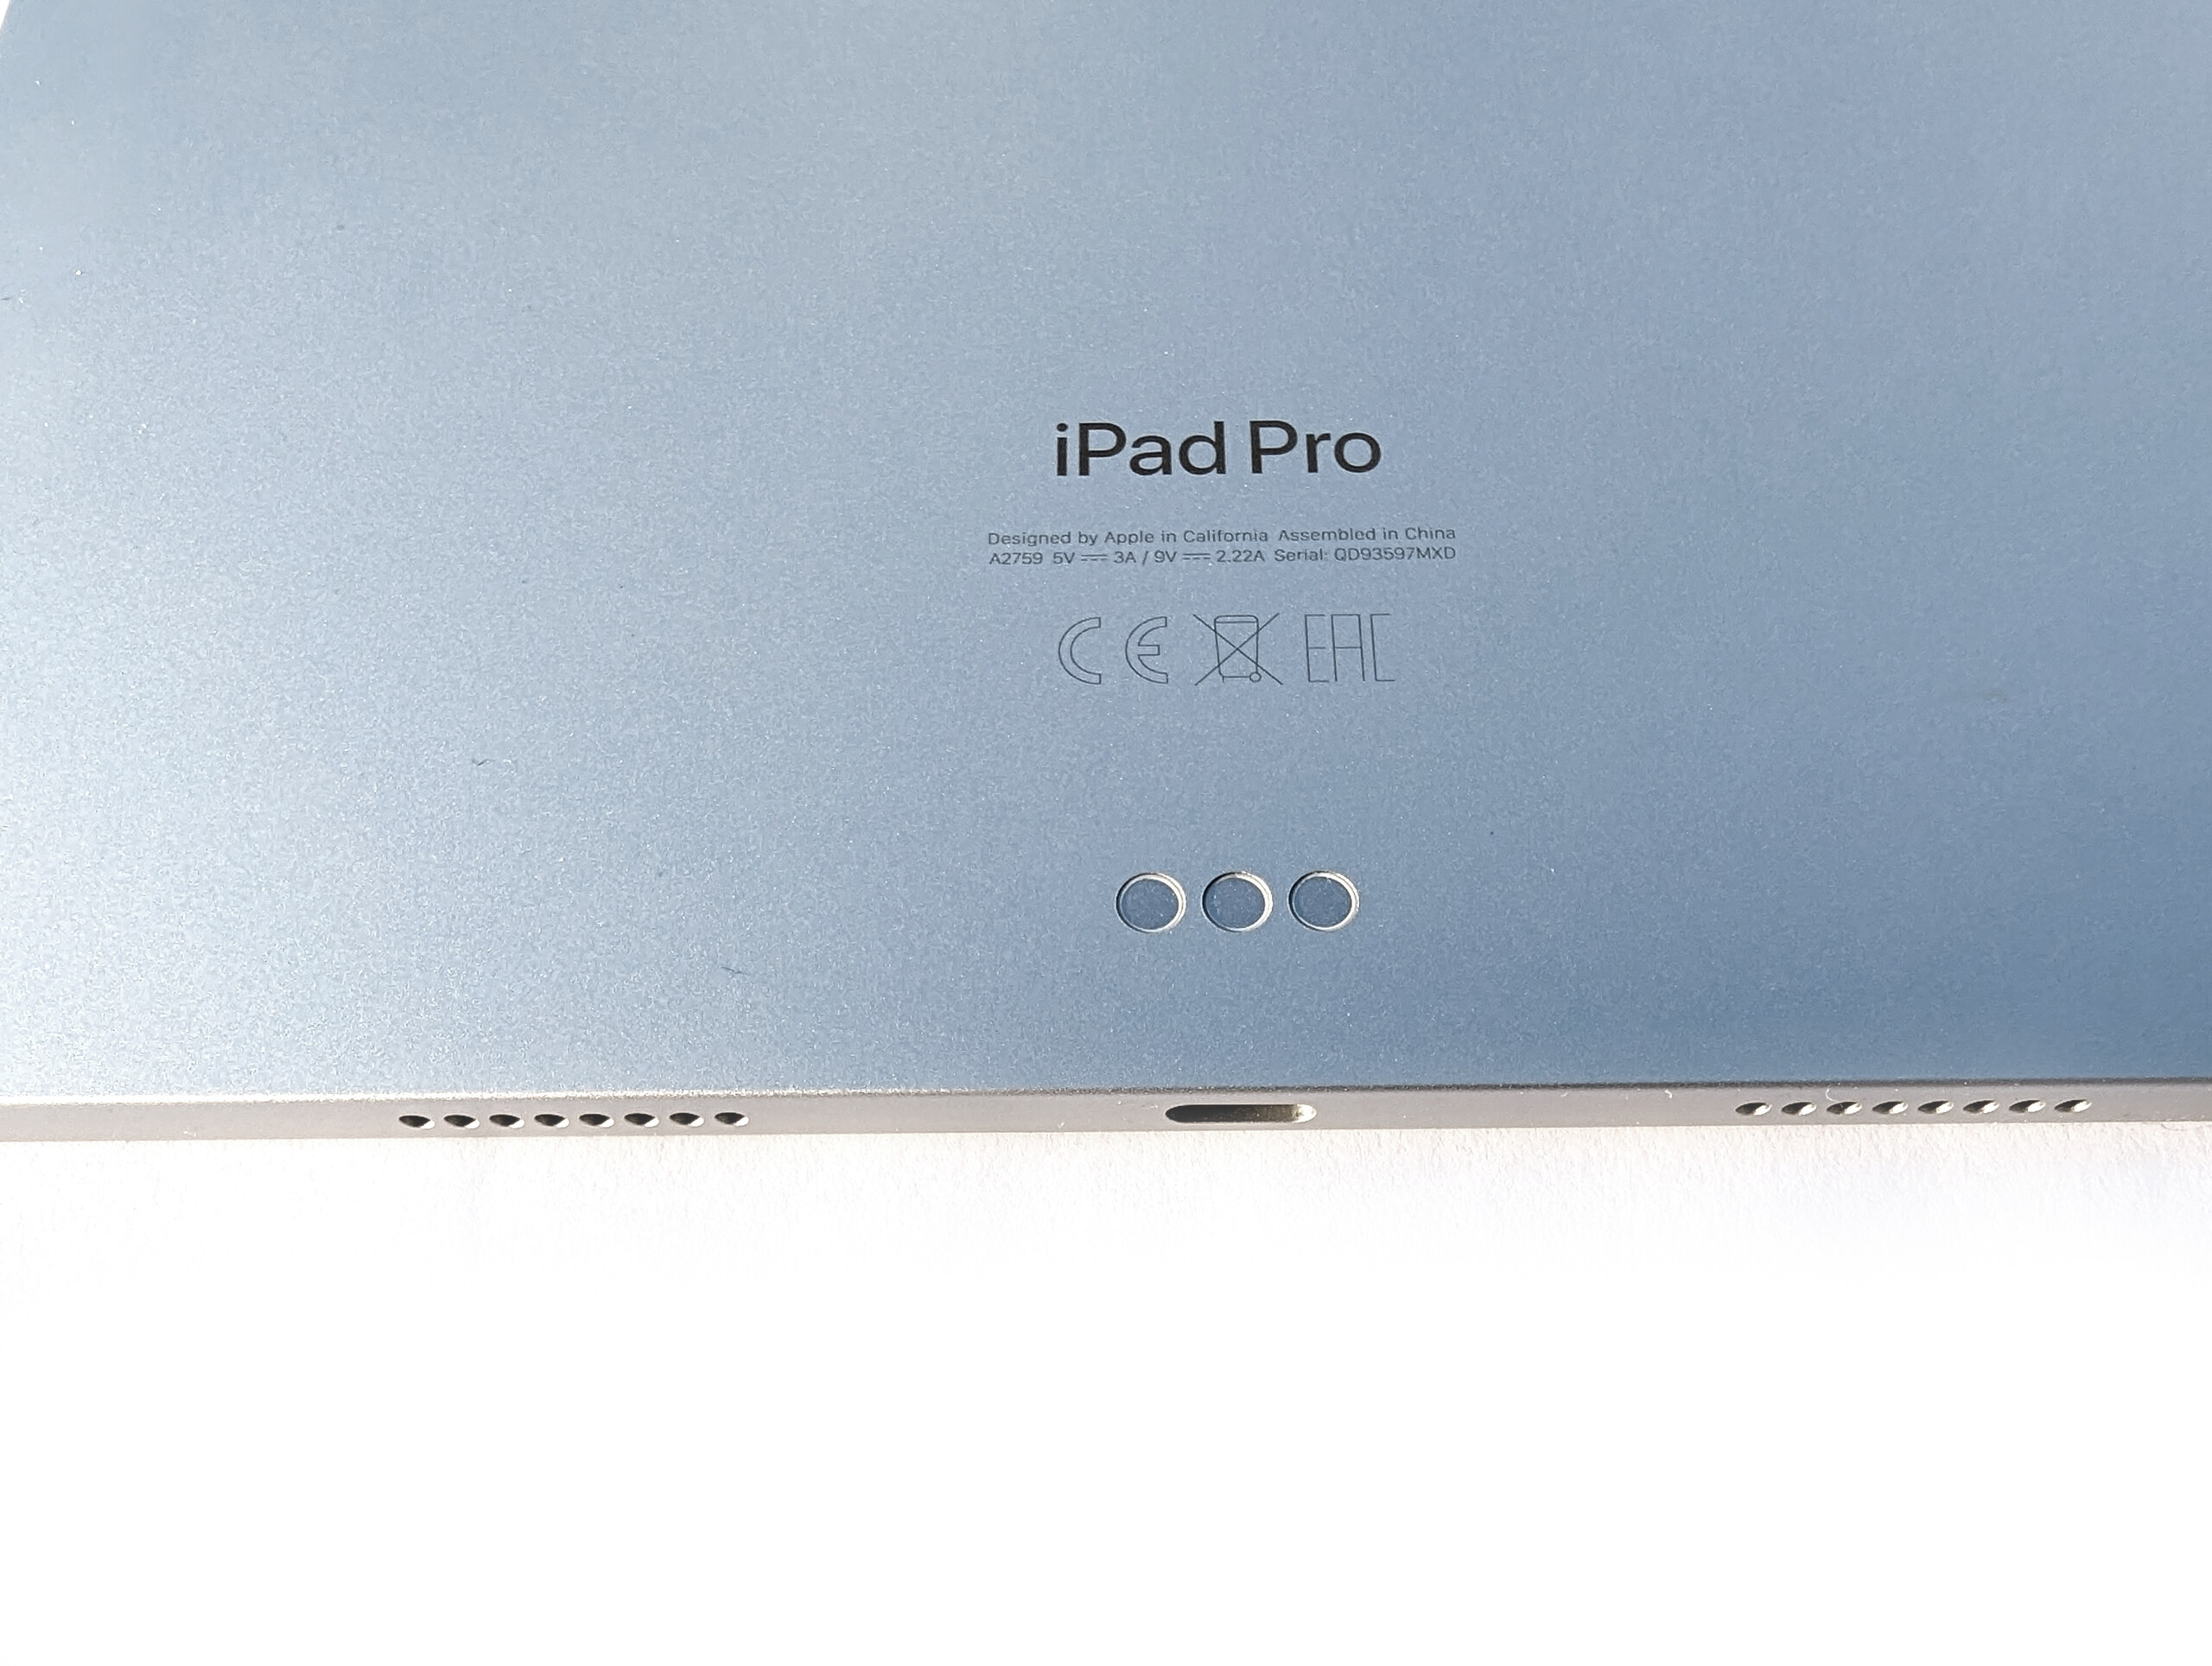 Apple iPad Air 5th Gen: Prices, Colors, Sizes, Features & Specs